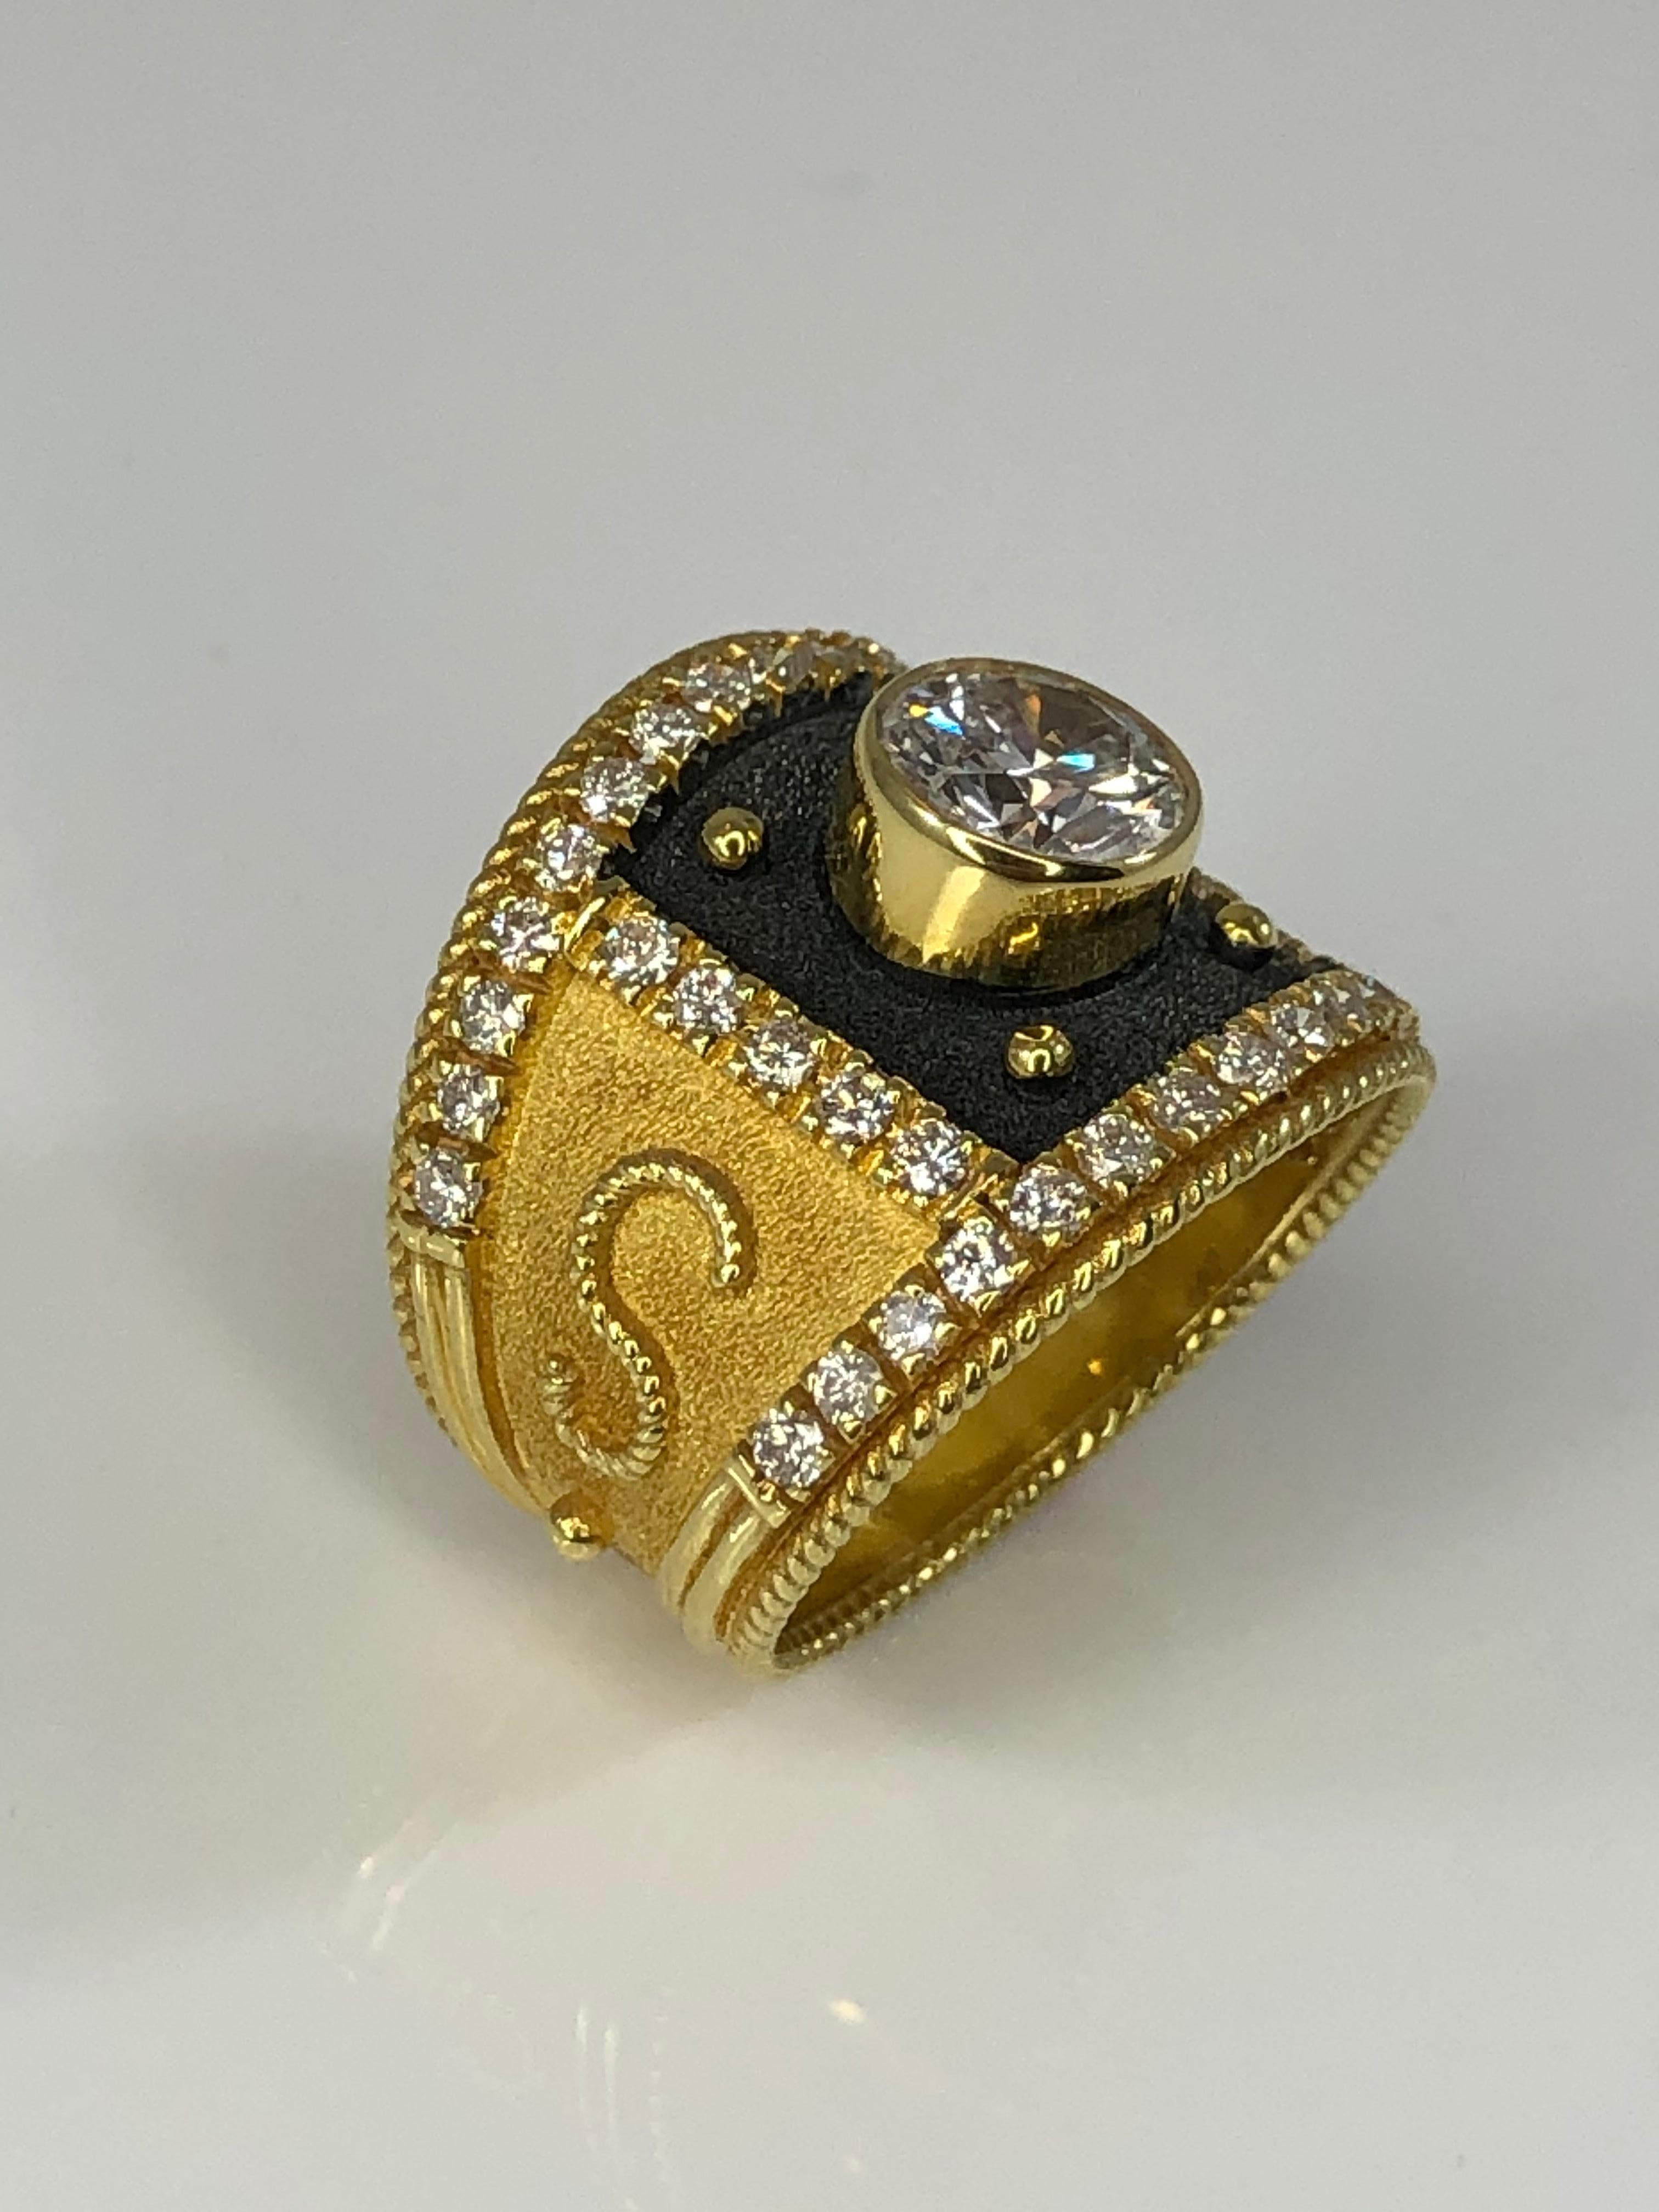 S.Georgios designer ring is handmade from solid 18 Karat Yellow Gold and is decorated with granulation details and a velvet background in Byzantine style. The front square area surrounding the diamond is finished with Black Rhodium. This ring